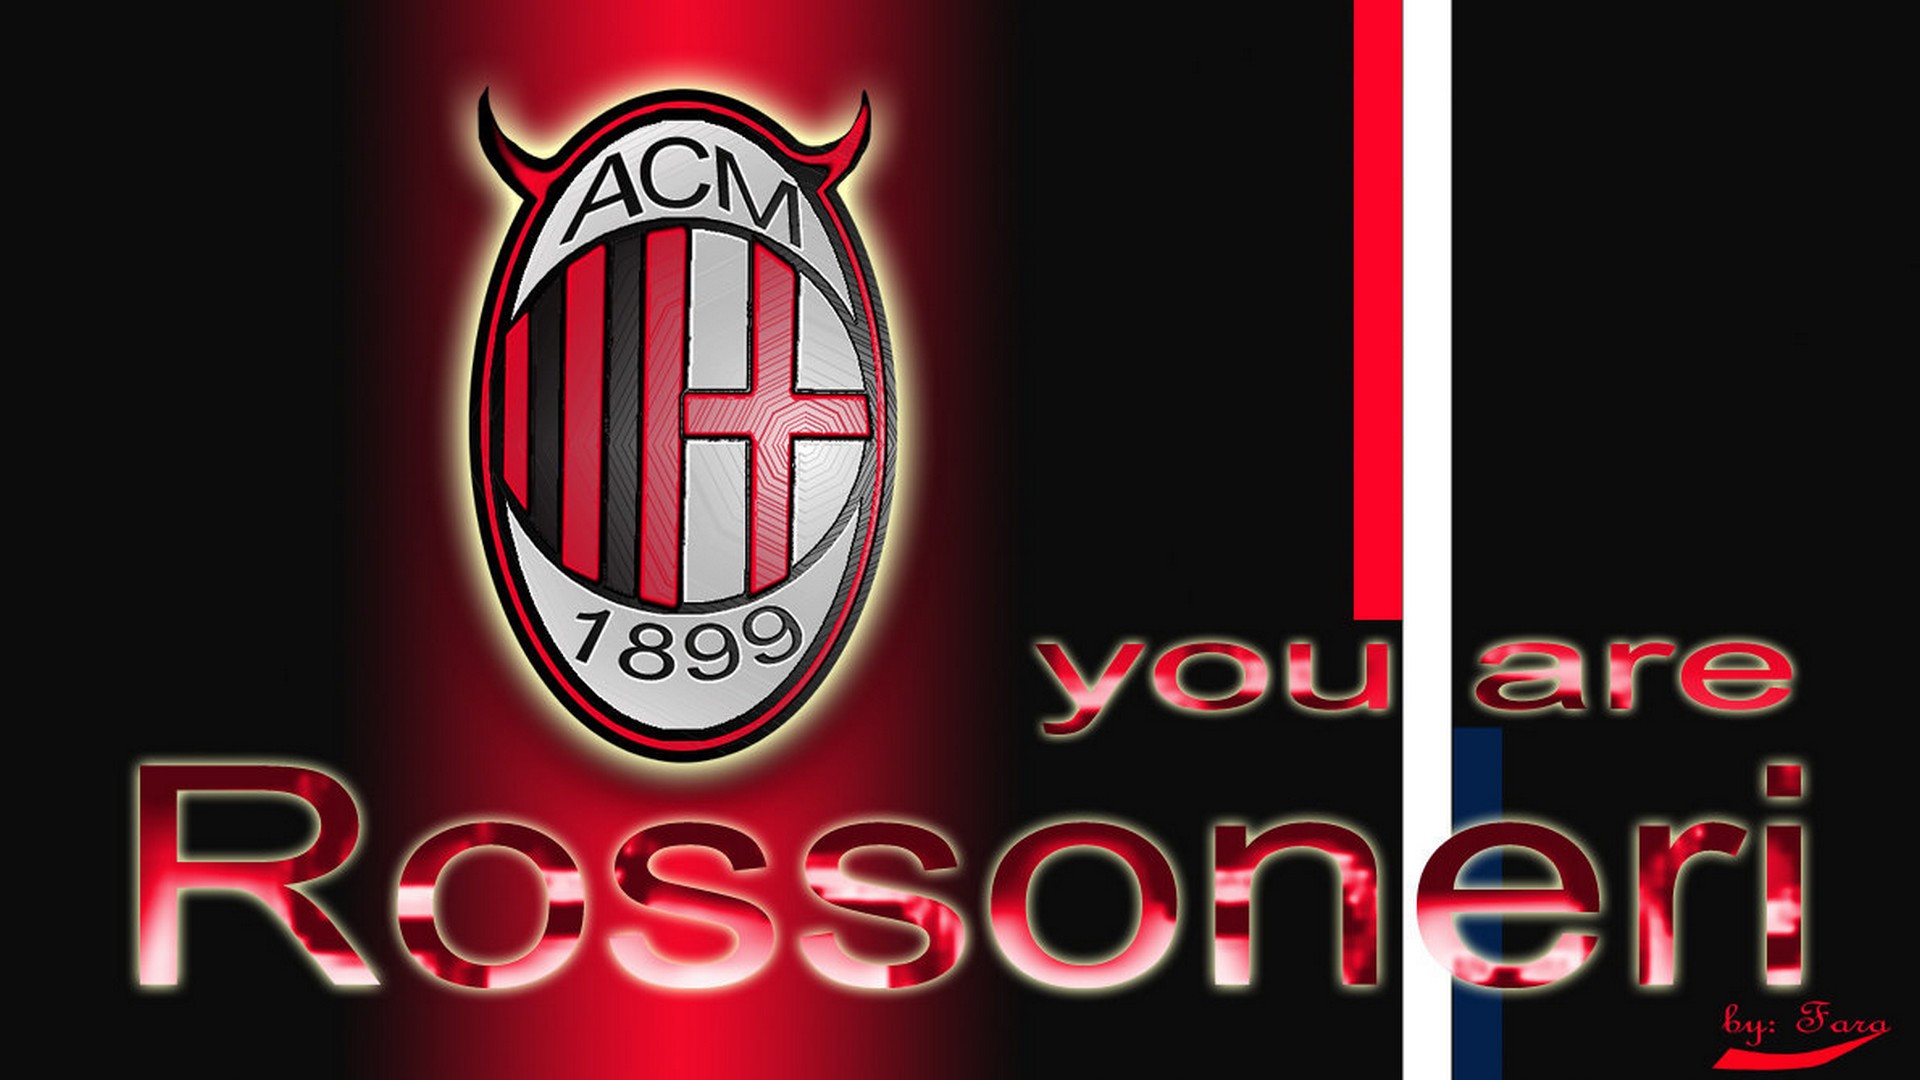 Wallpapers AC Milan with high-resolution 1920x1080 pixel. You can use this wallpaper for your Desktop Computers, Mac Screensavers, Windows Backgrounds, iPhone Wallpapers, Tablet or Android Lock screen and another Mobile device